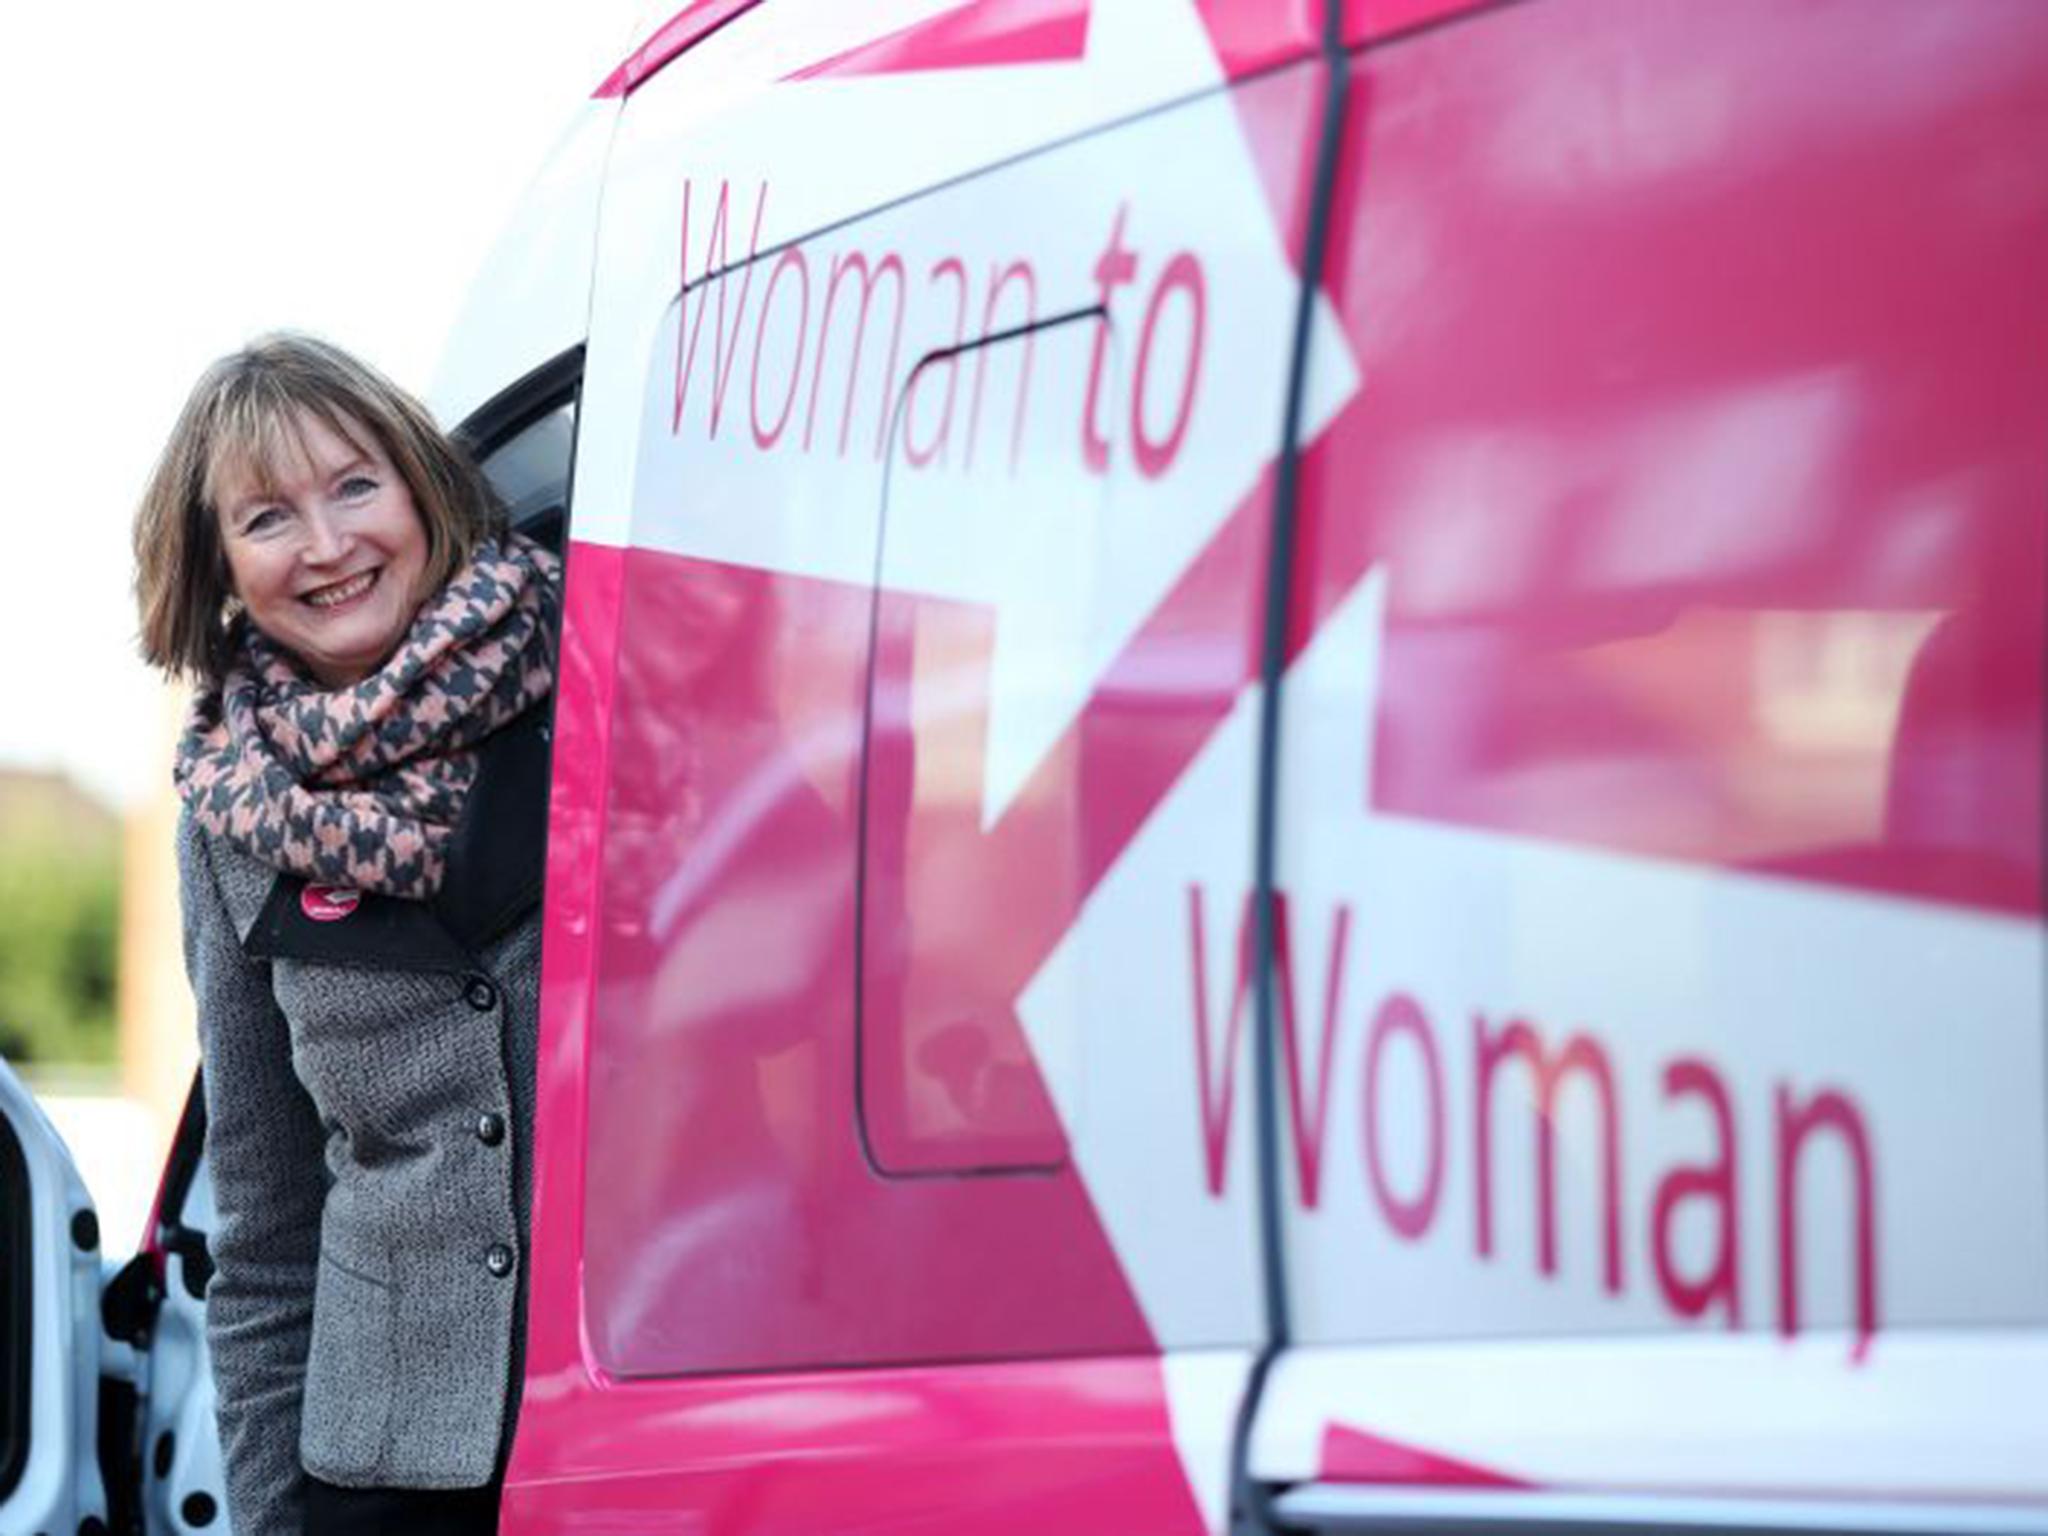 In the pink: Harriet Harman’s campaign bus certainly made headlines